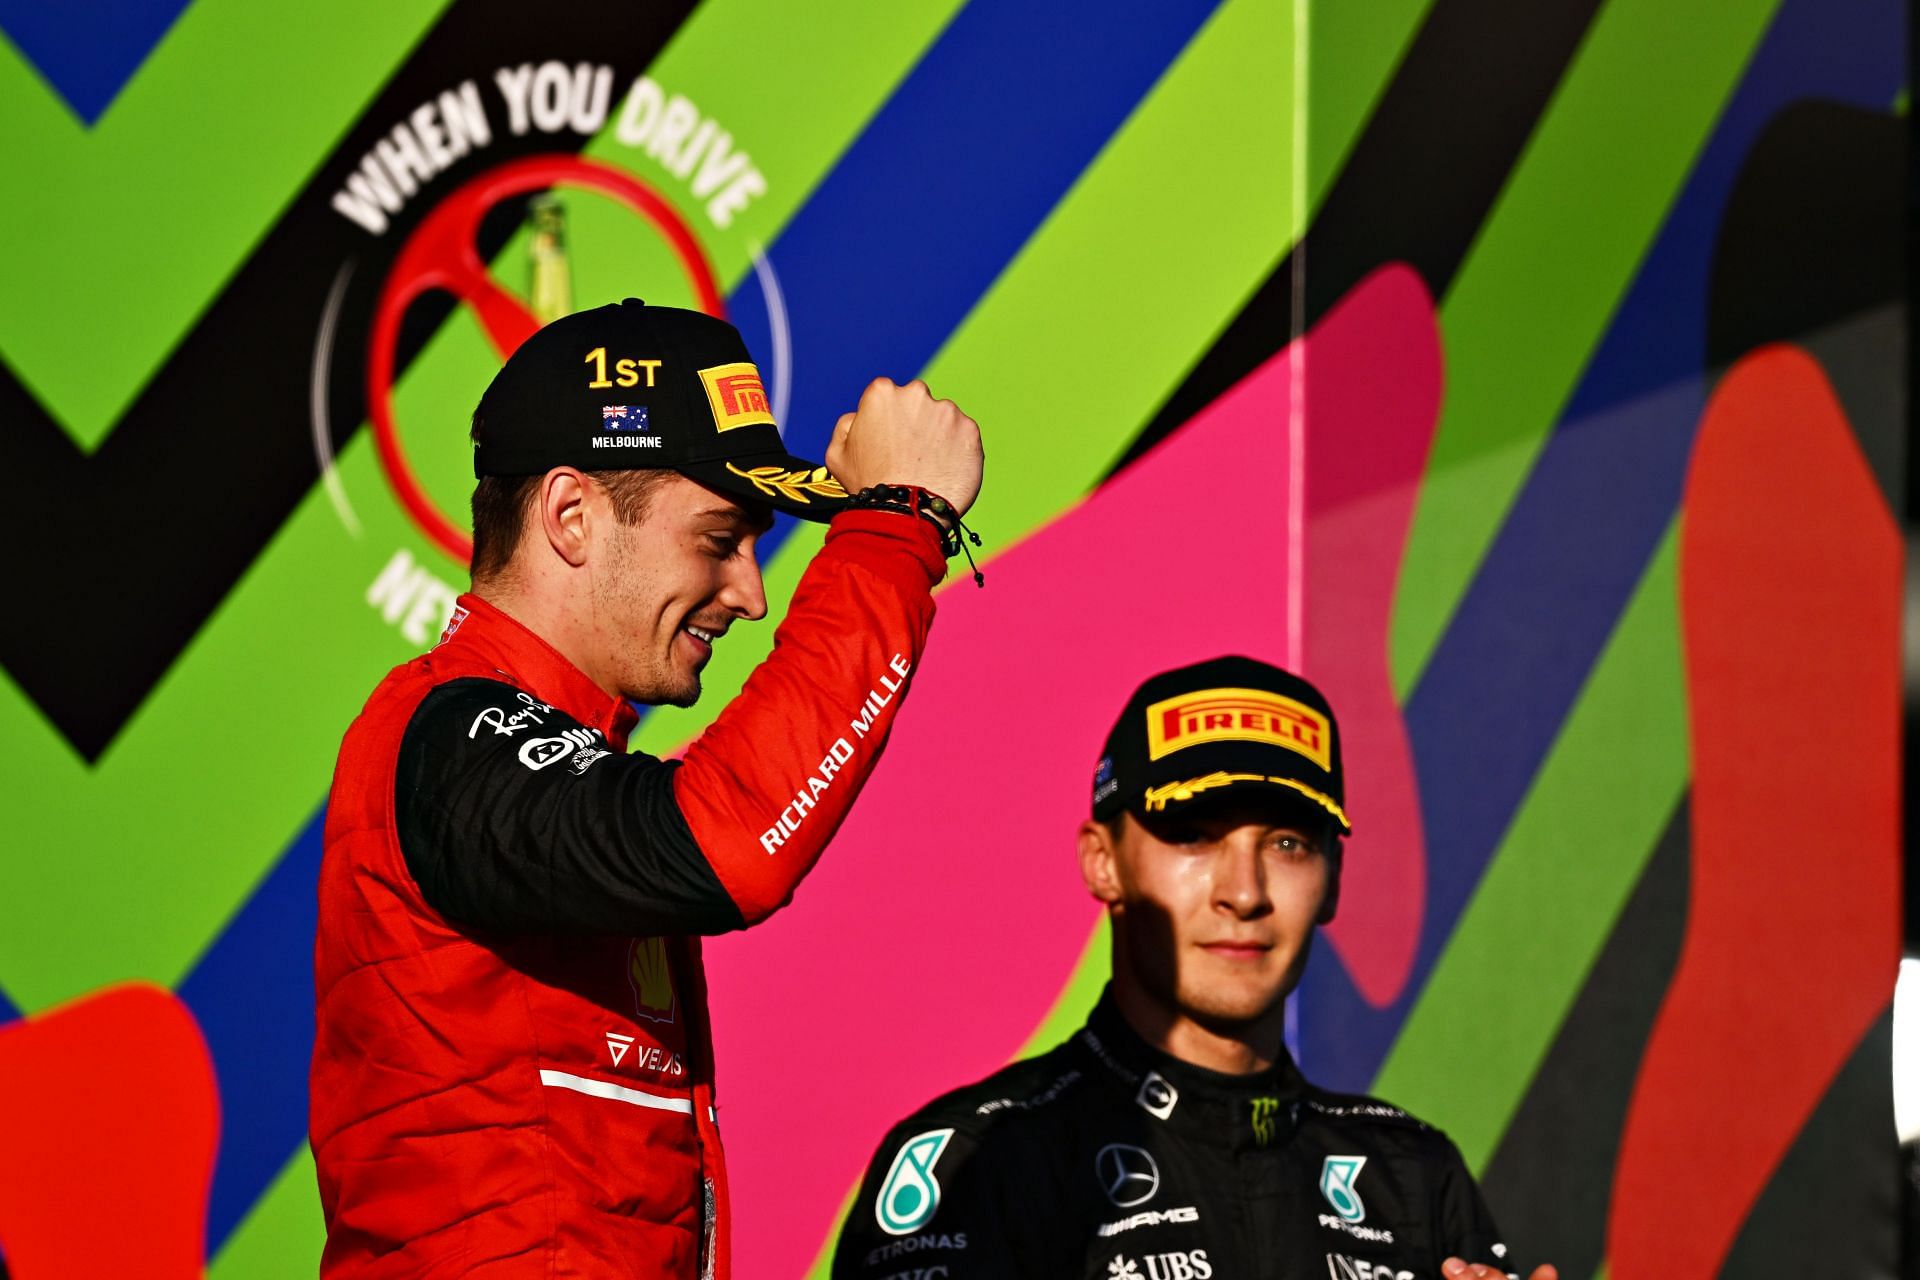 Charles Leclerc was a class above the rest of the field in the Australian GP